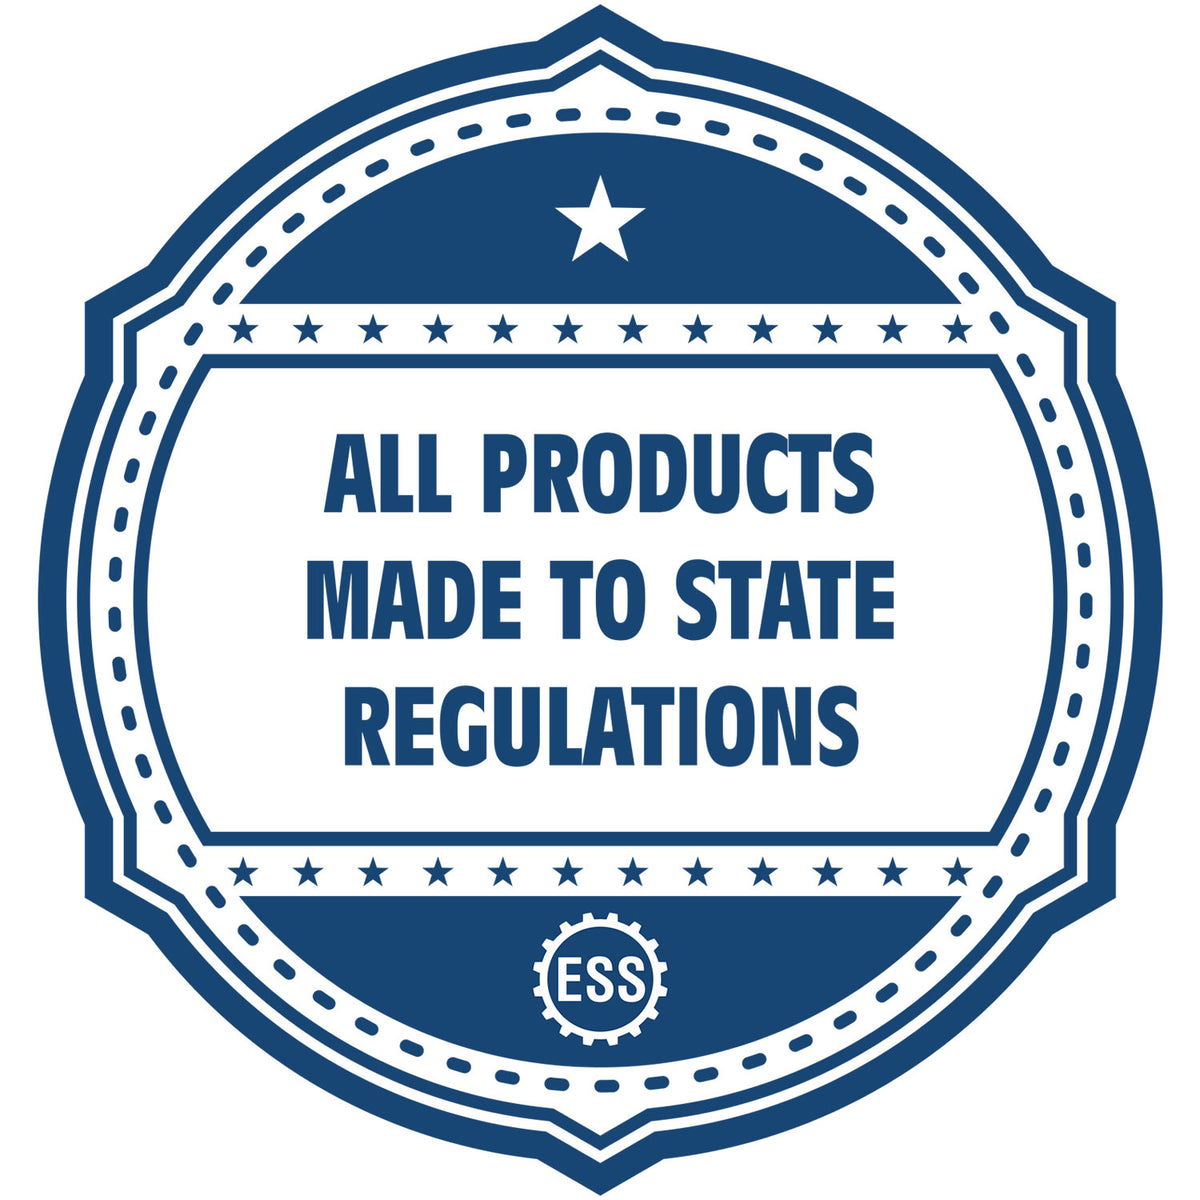 An icon or badge element for the Montana Desk Surveyor Seal Embosser showing that this product is made in compliance with state regulations.